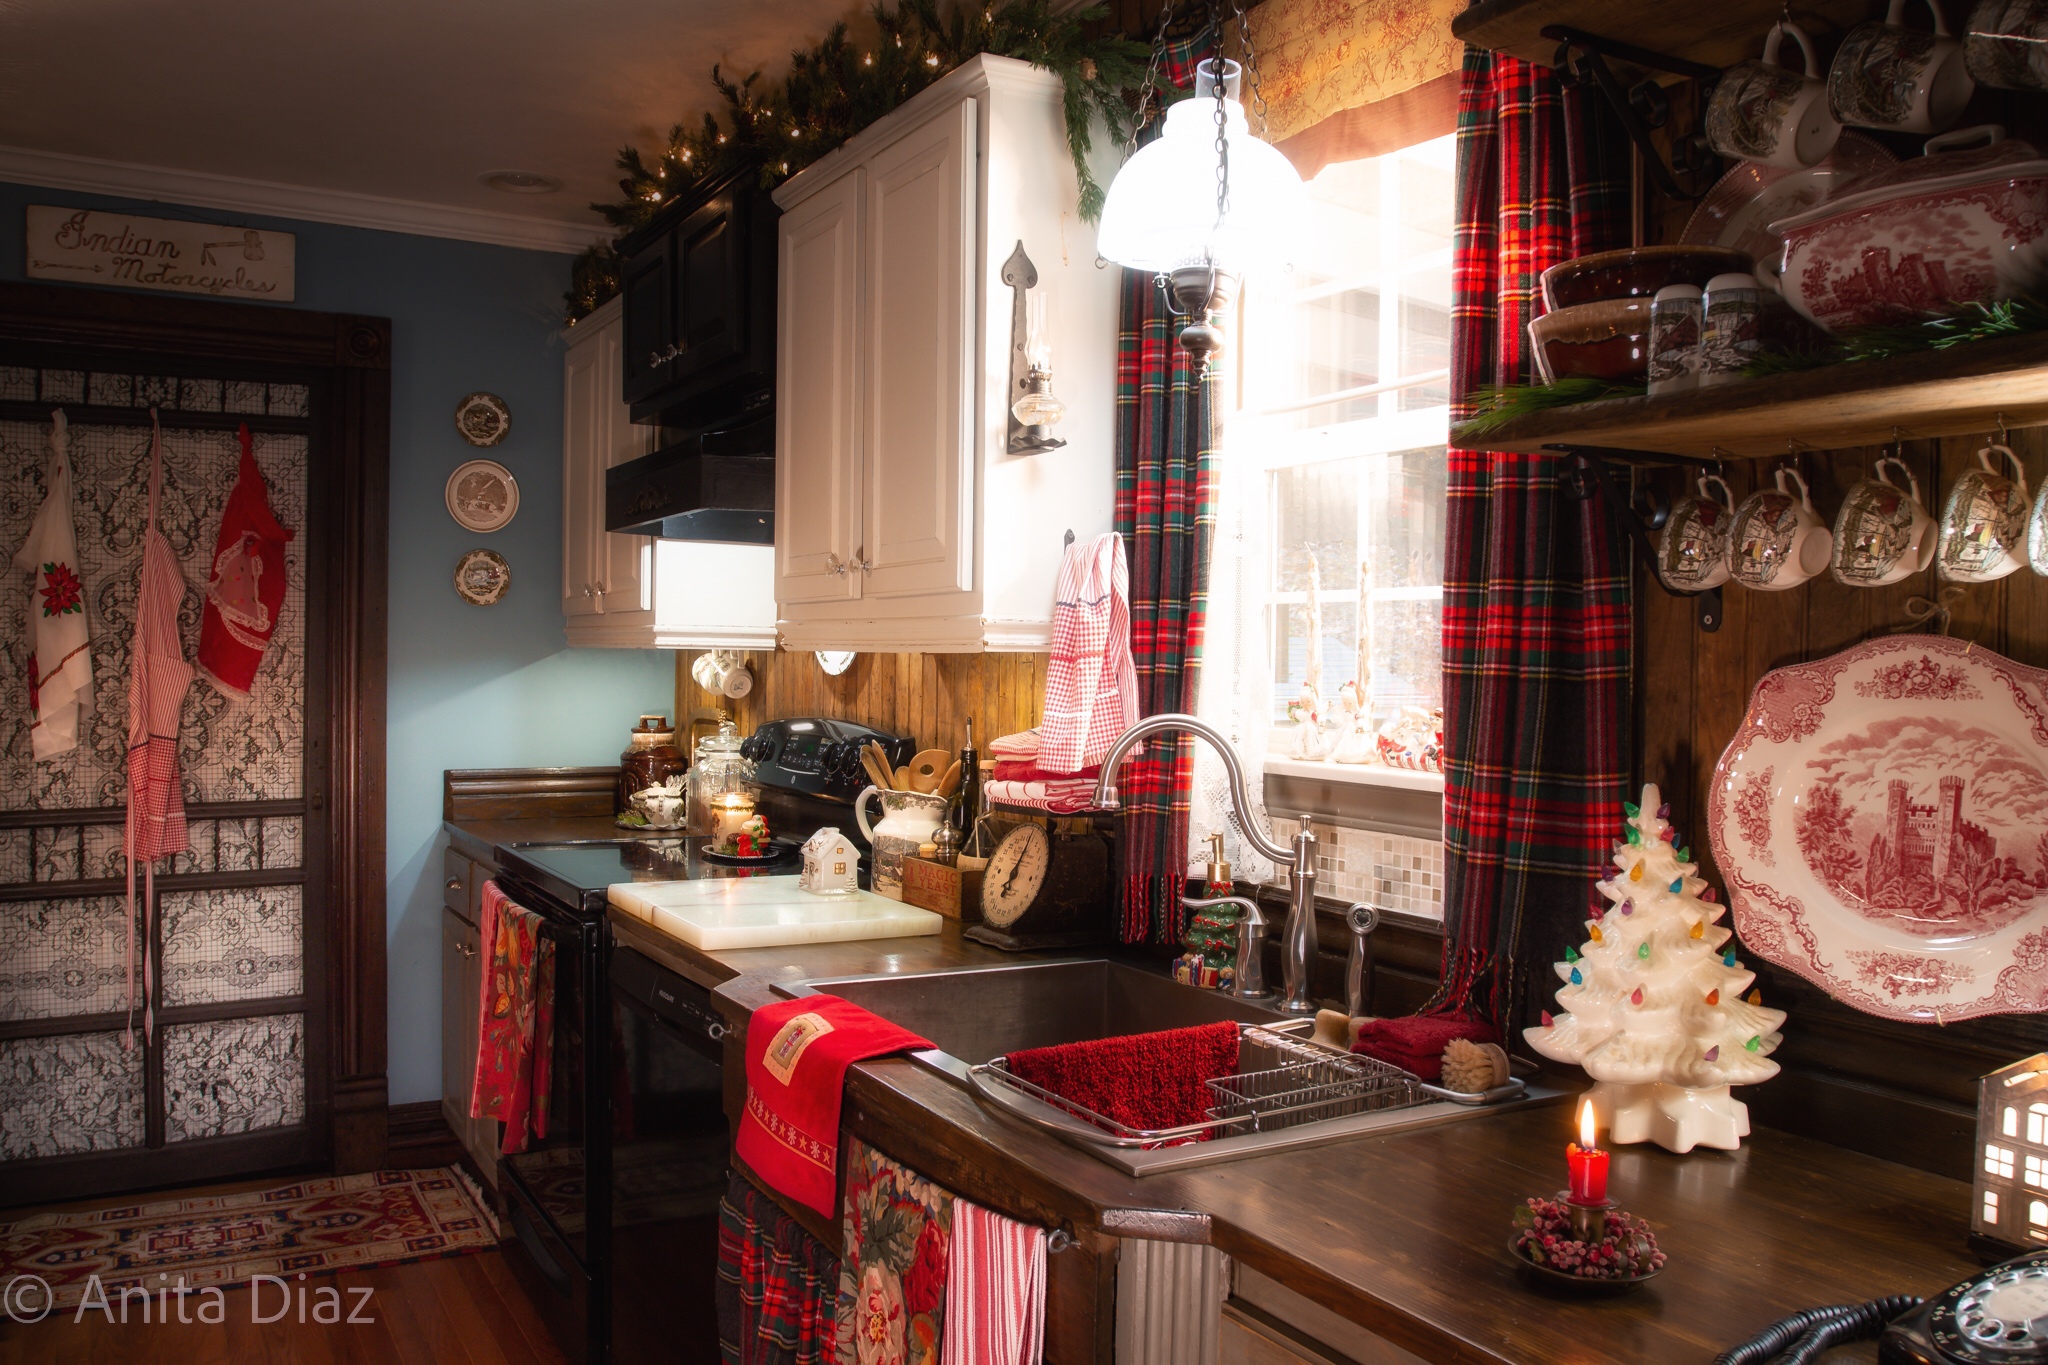 Merry Christmas cottage kitchen and dining - Whispering Pines Homestead